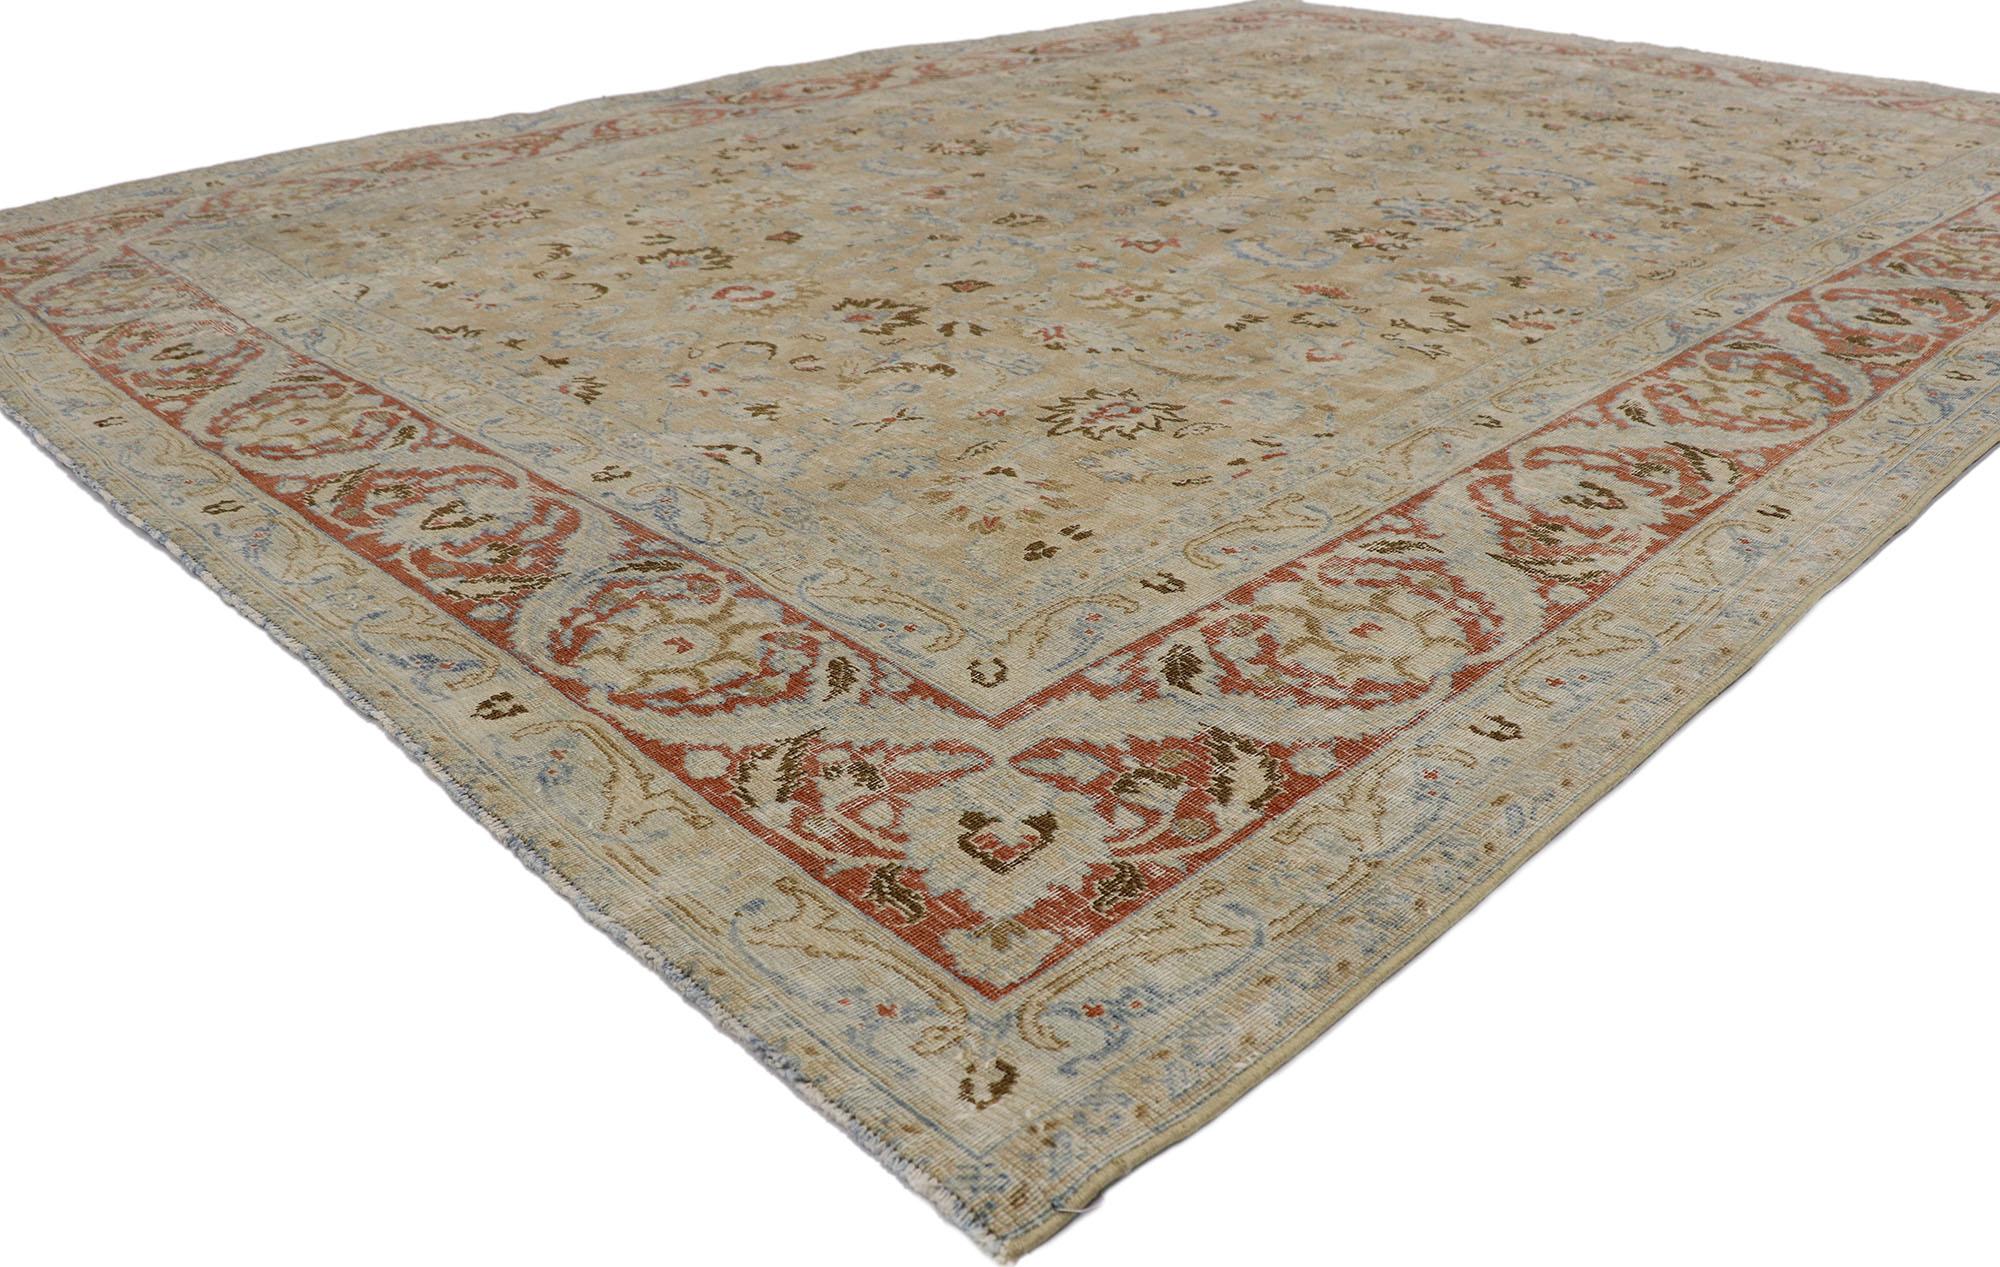 53656 Distressed Antique Persian Mood Rug with Rustic Style 07'11 x 10'11. Effortless beauty and soft, bespoke vibes meet rustic sensibility in this hand knotted wool distressed antique Persian Mood rug. The lovingly time-worn field features an